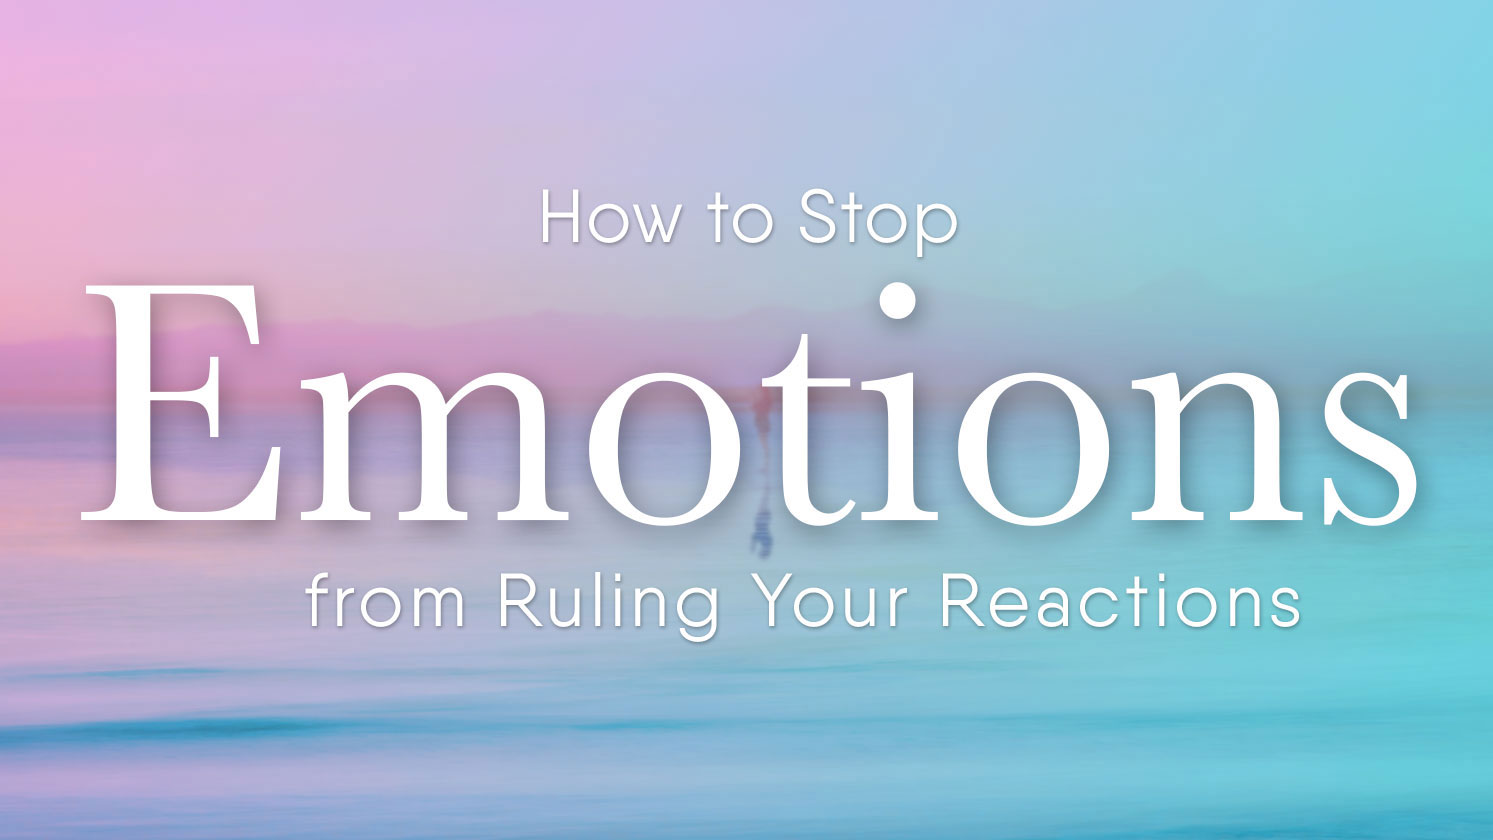 How to Stop Emotions from Ruling Your Reactions